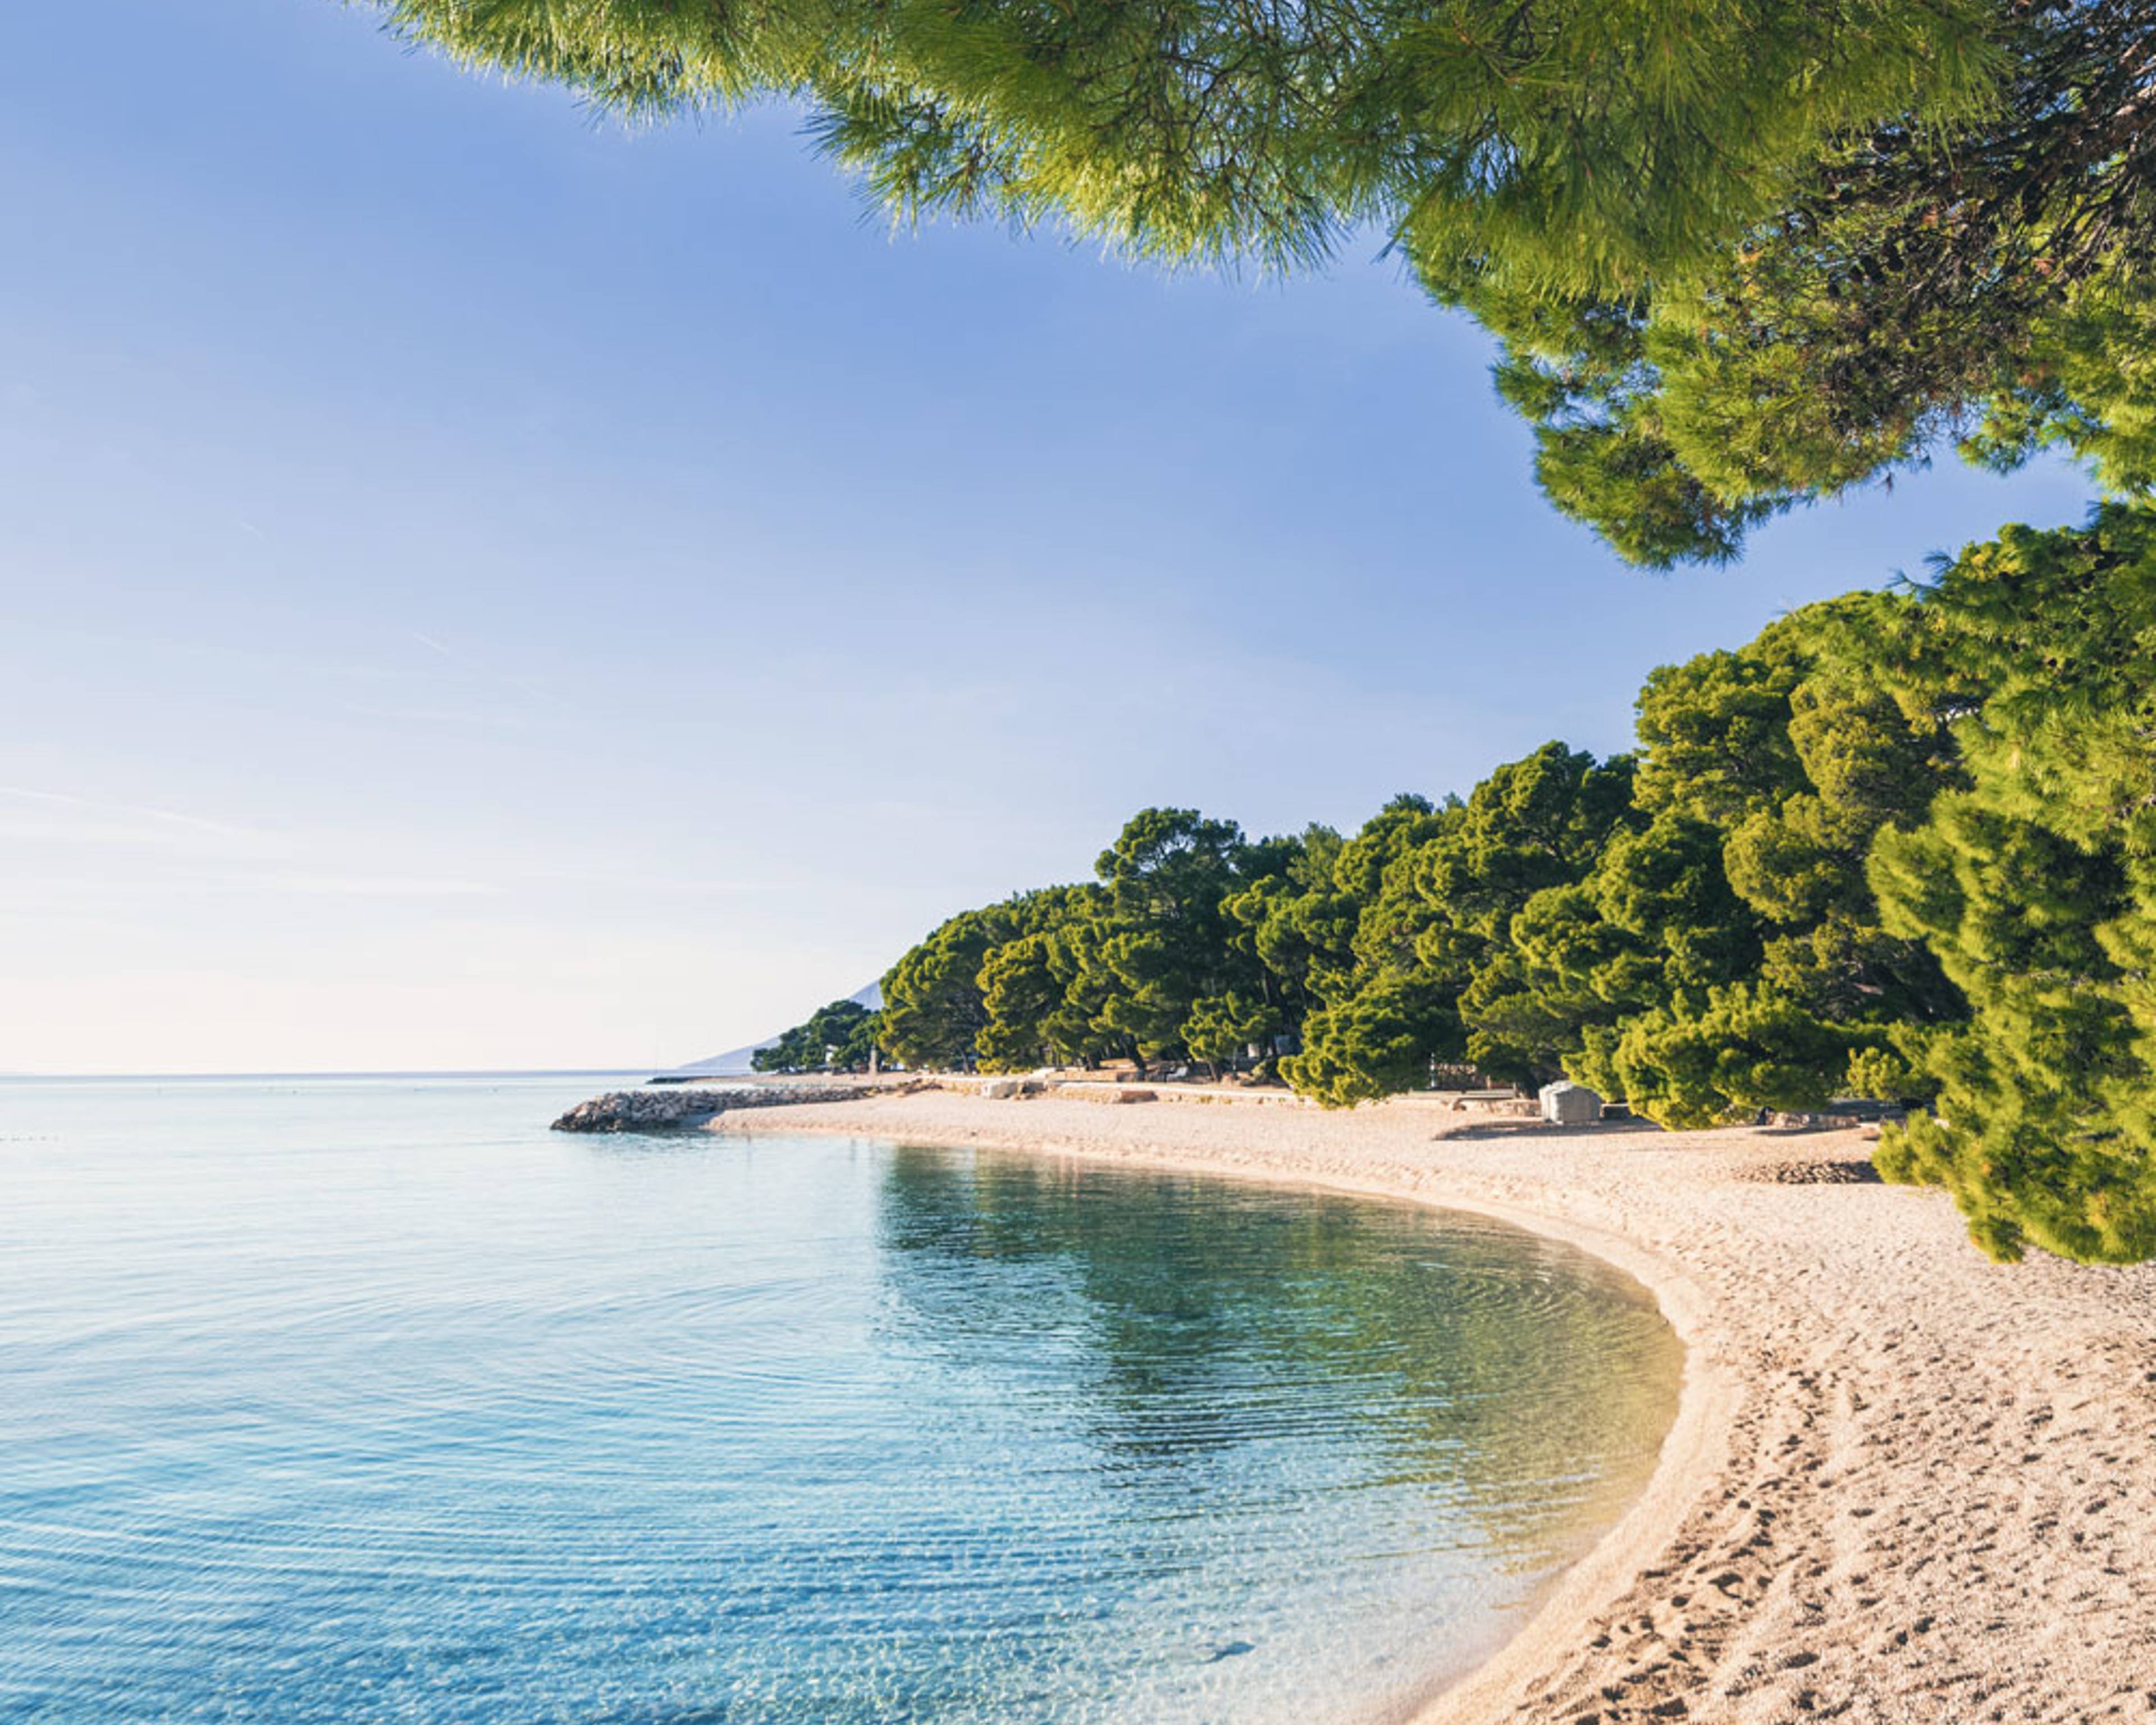 Design your perfect trip to Croatia's beaches with a local expert